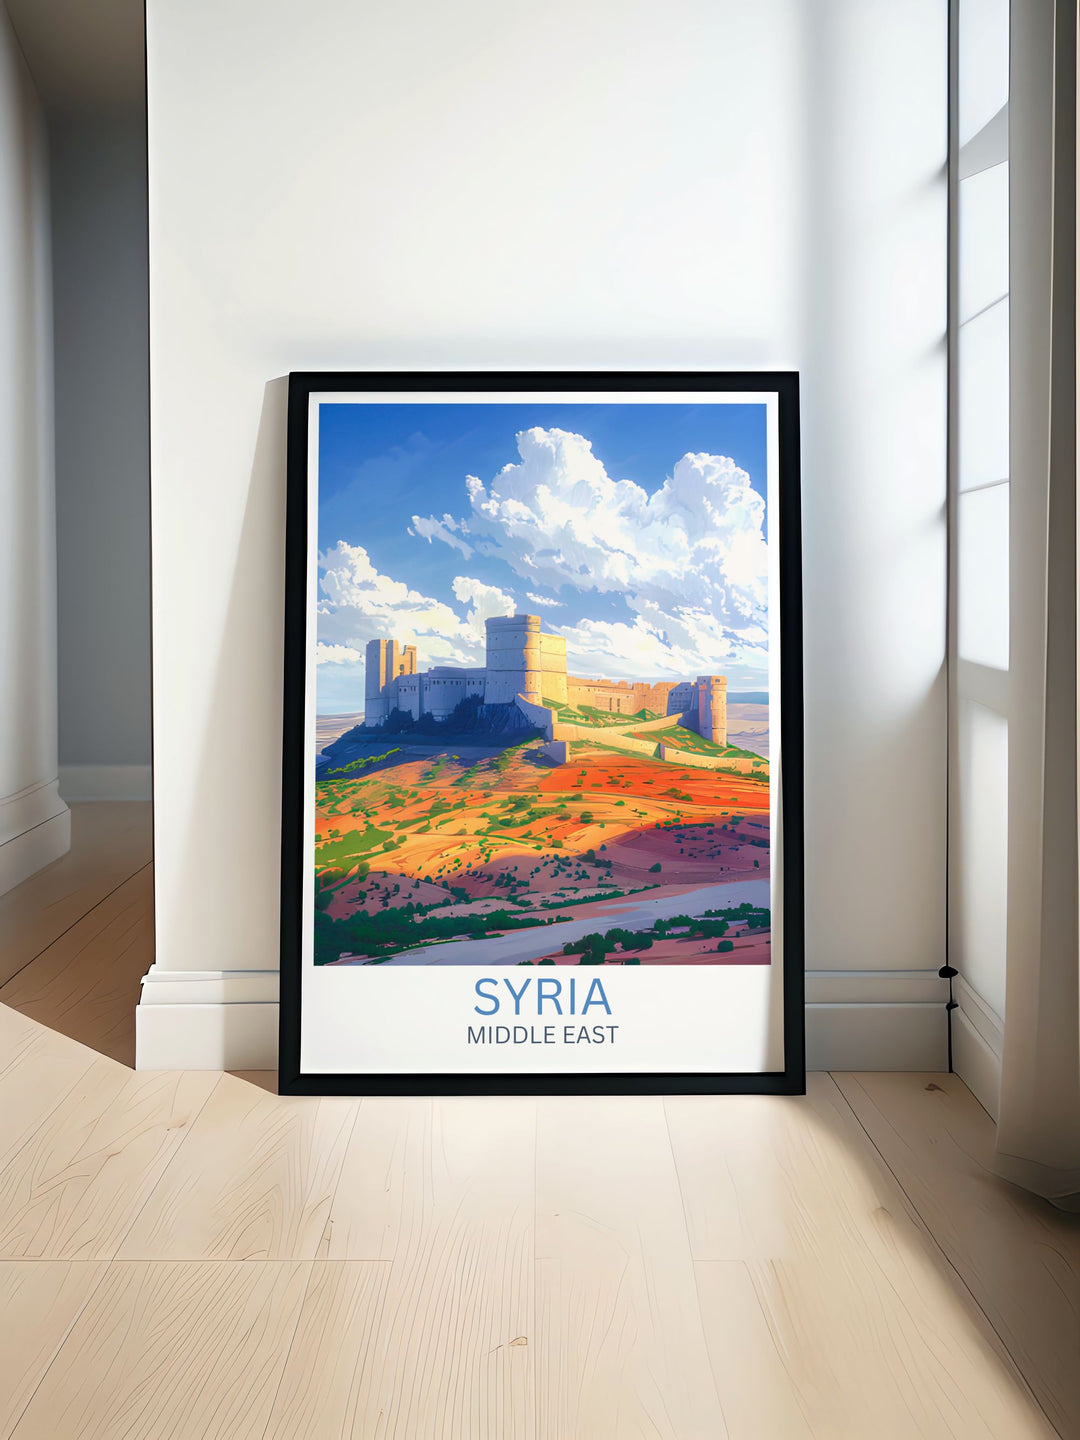 Detailed art print of Krak des Chevaliers showcasing the medieval castles imposing structure and picturesque landscape, capturing the historical significance and architectural beauty of one of Syrias most renowned landmarks, perfect for adding a touch of Middle Eastern heritage to any space.